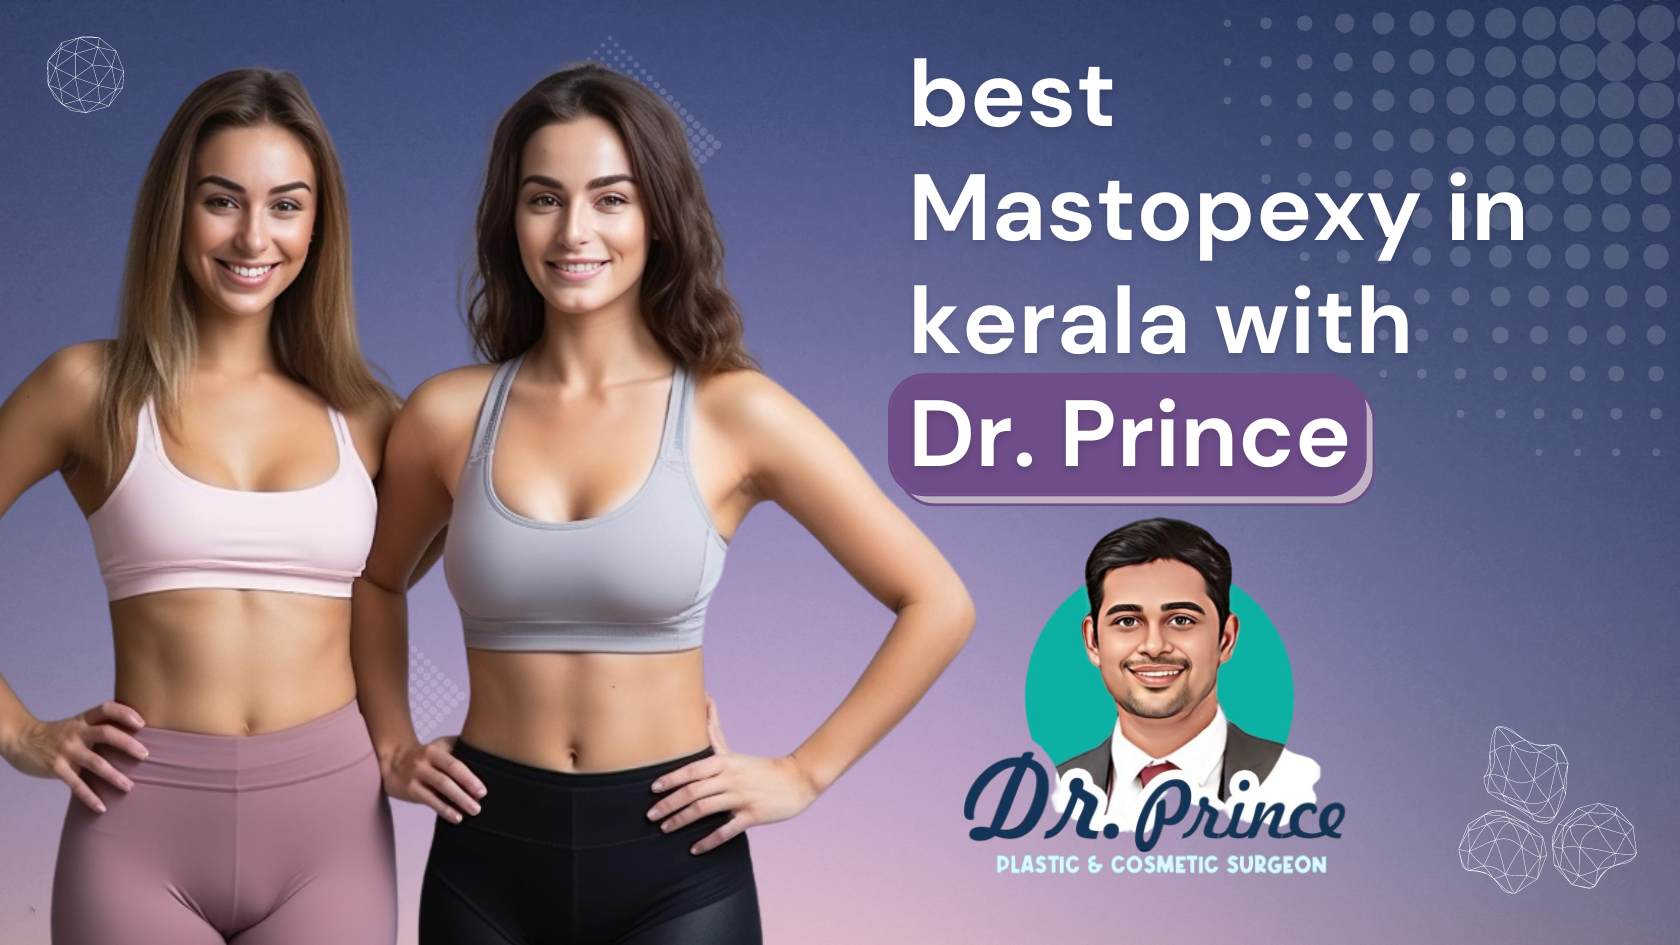 Mastopexy in Kerala - Dr. Prince's Expertise